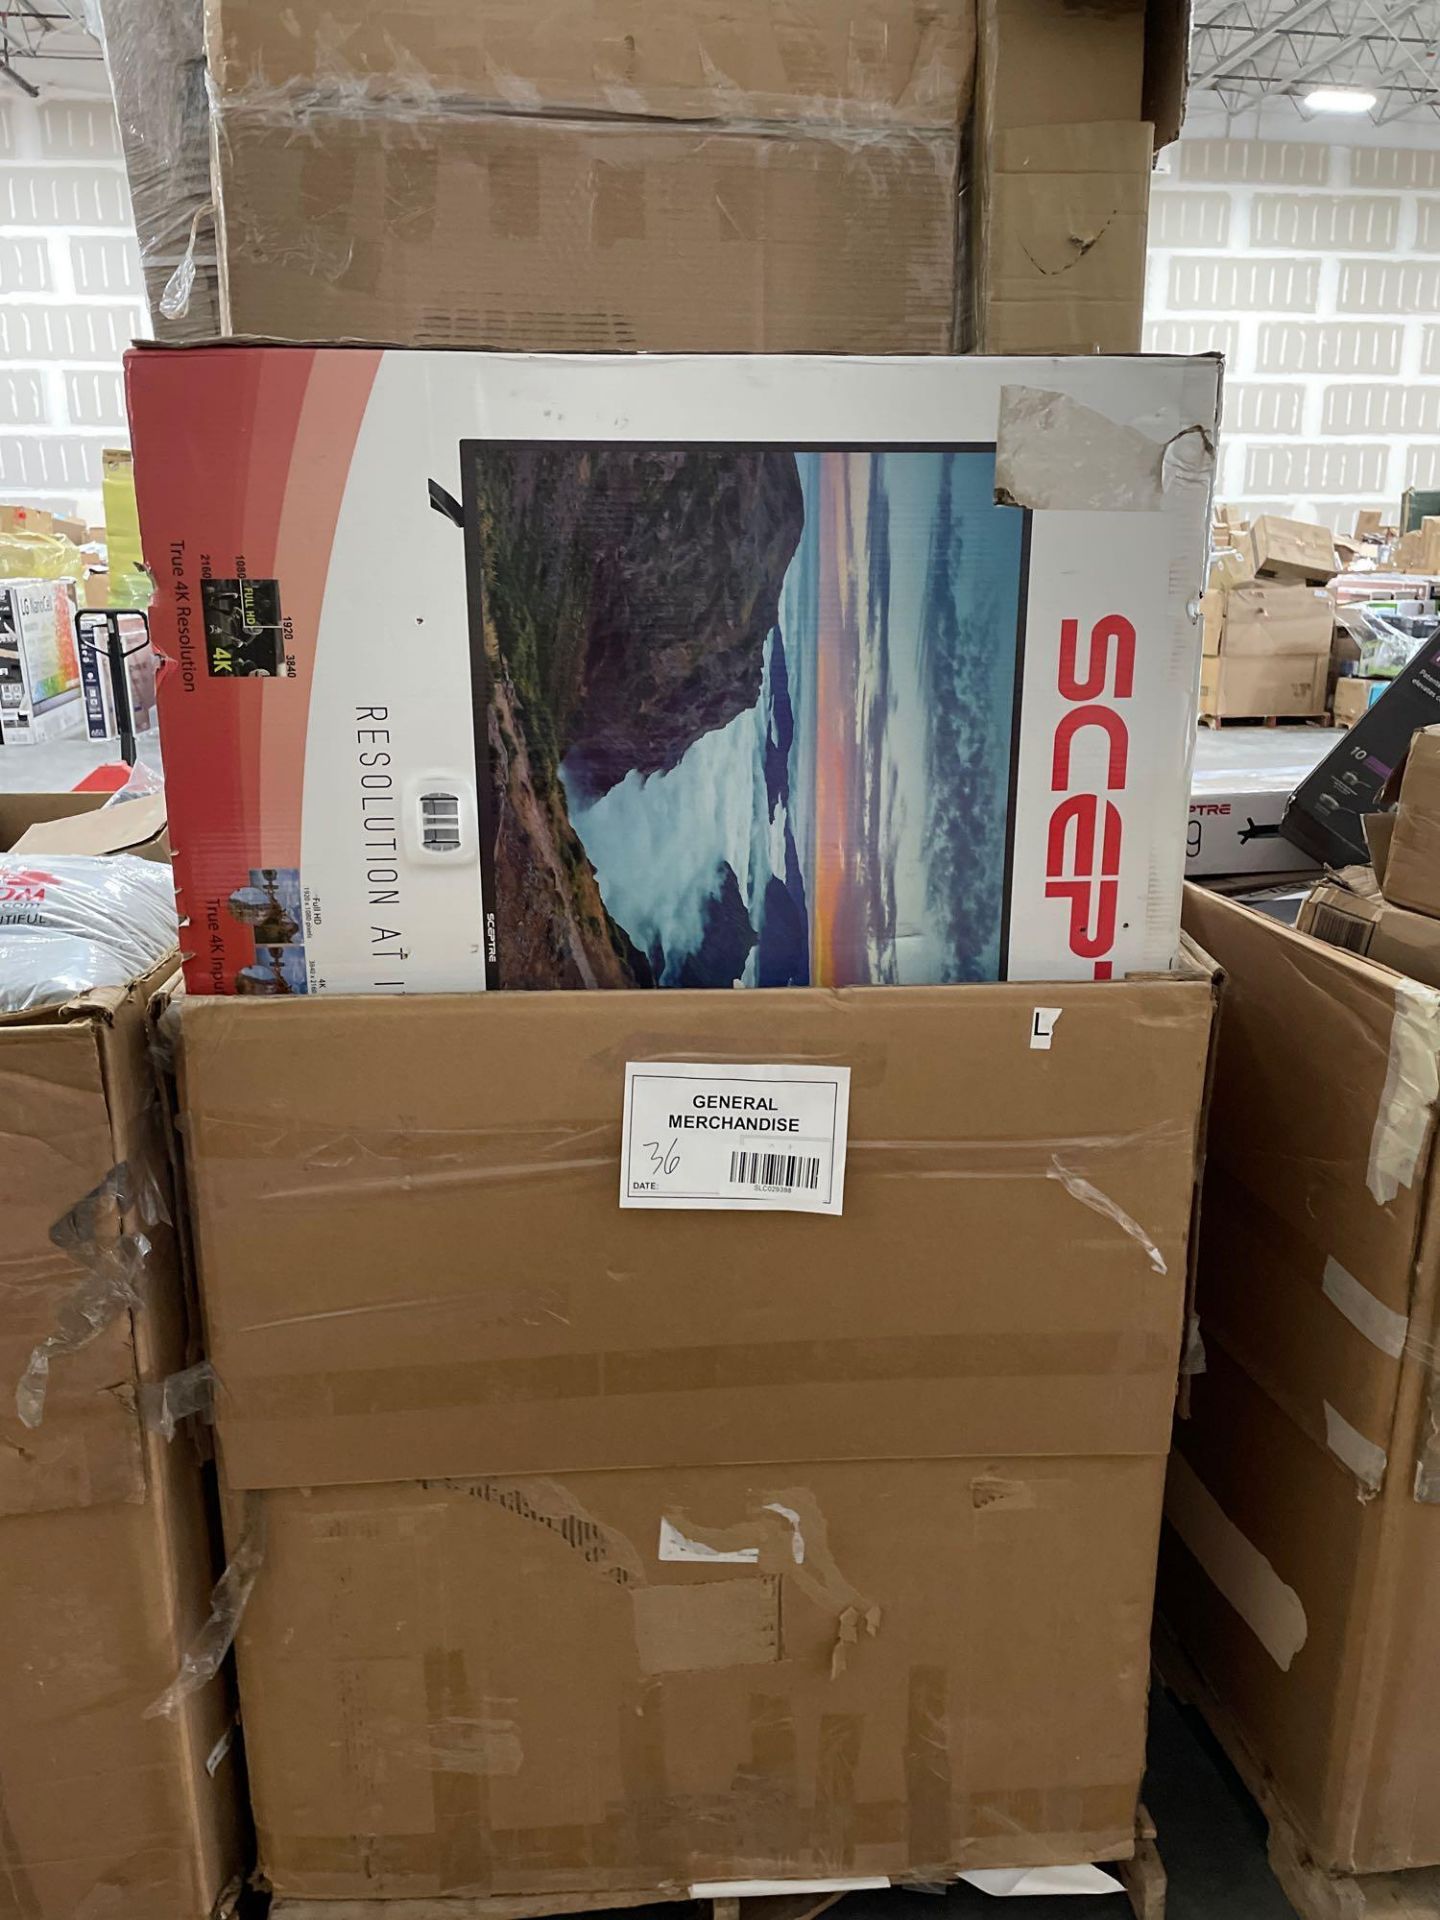 Sceptre 65" TV and more